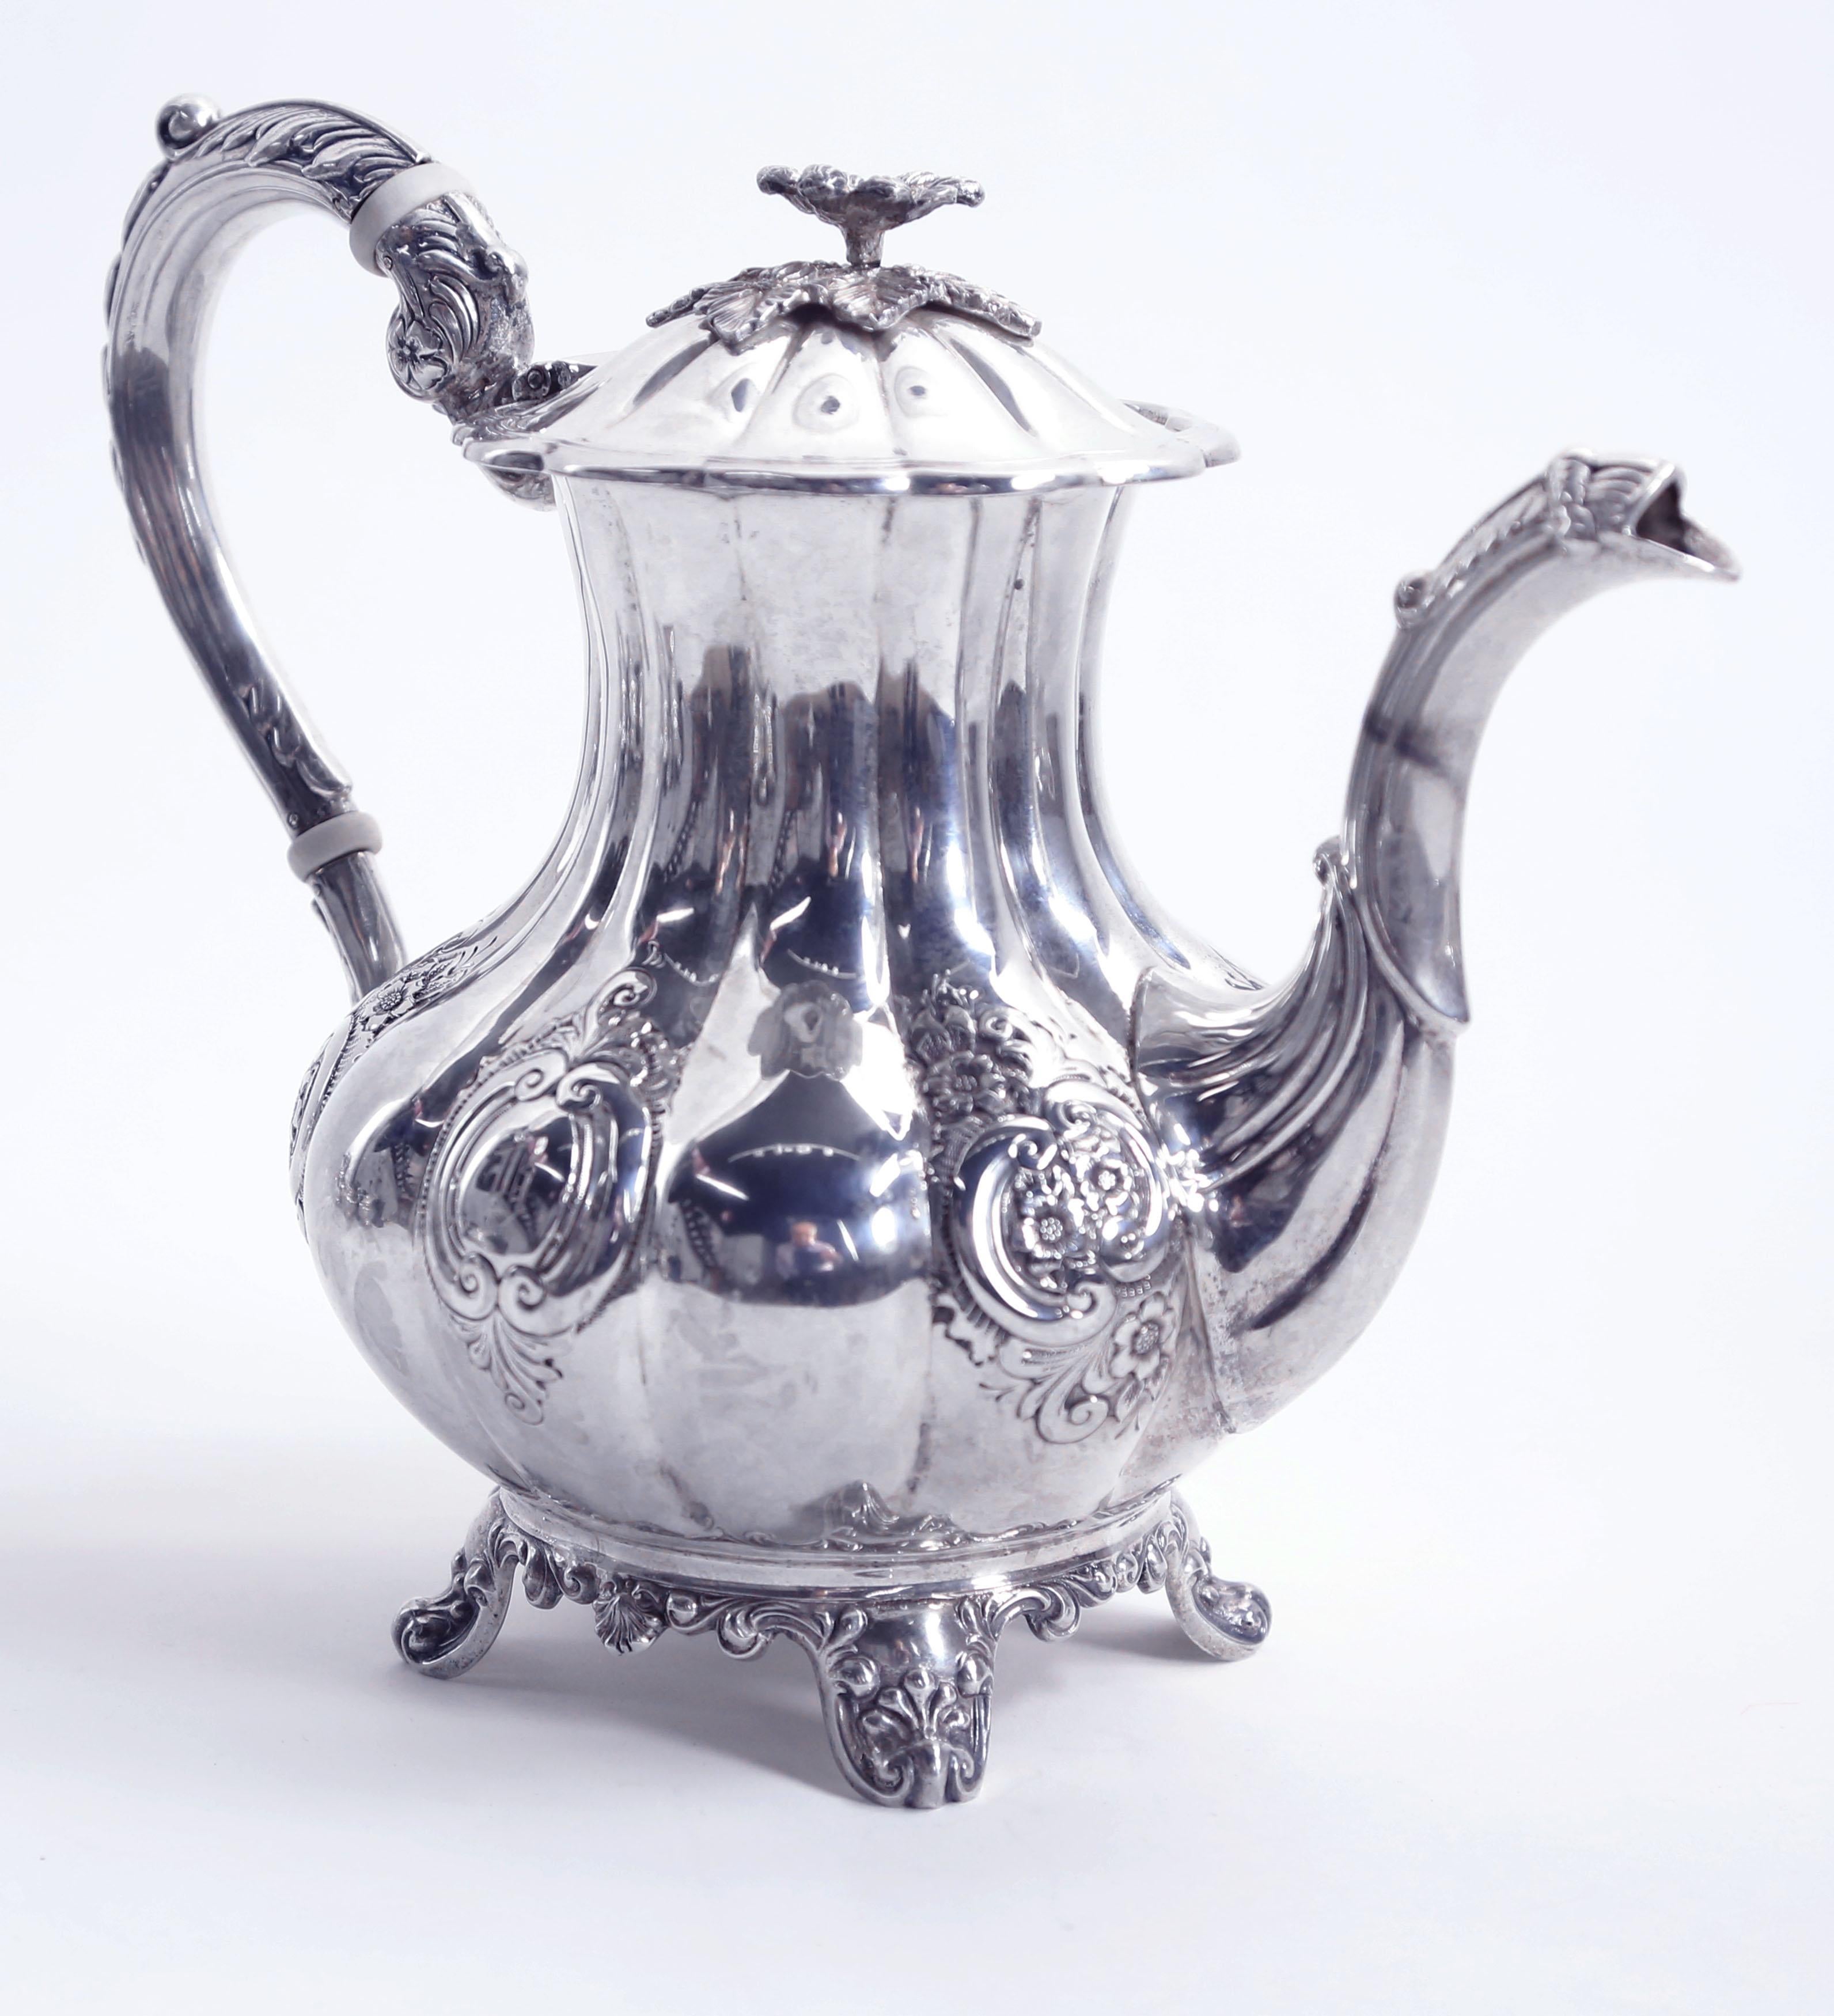 Beautiful and elegant five-piece Birks sterling silver coffee tea set; handcrafted in Repoussé Floral pattern, comprising of a coffee pot, a tea pot, a hot water pot, sugar bowl and creamer. Approximate dimensions: Coffee pot is 9 inches tall x 11